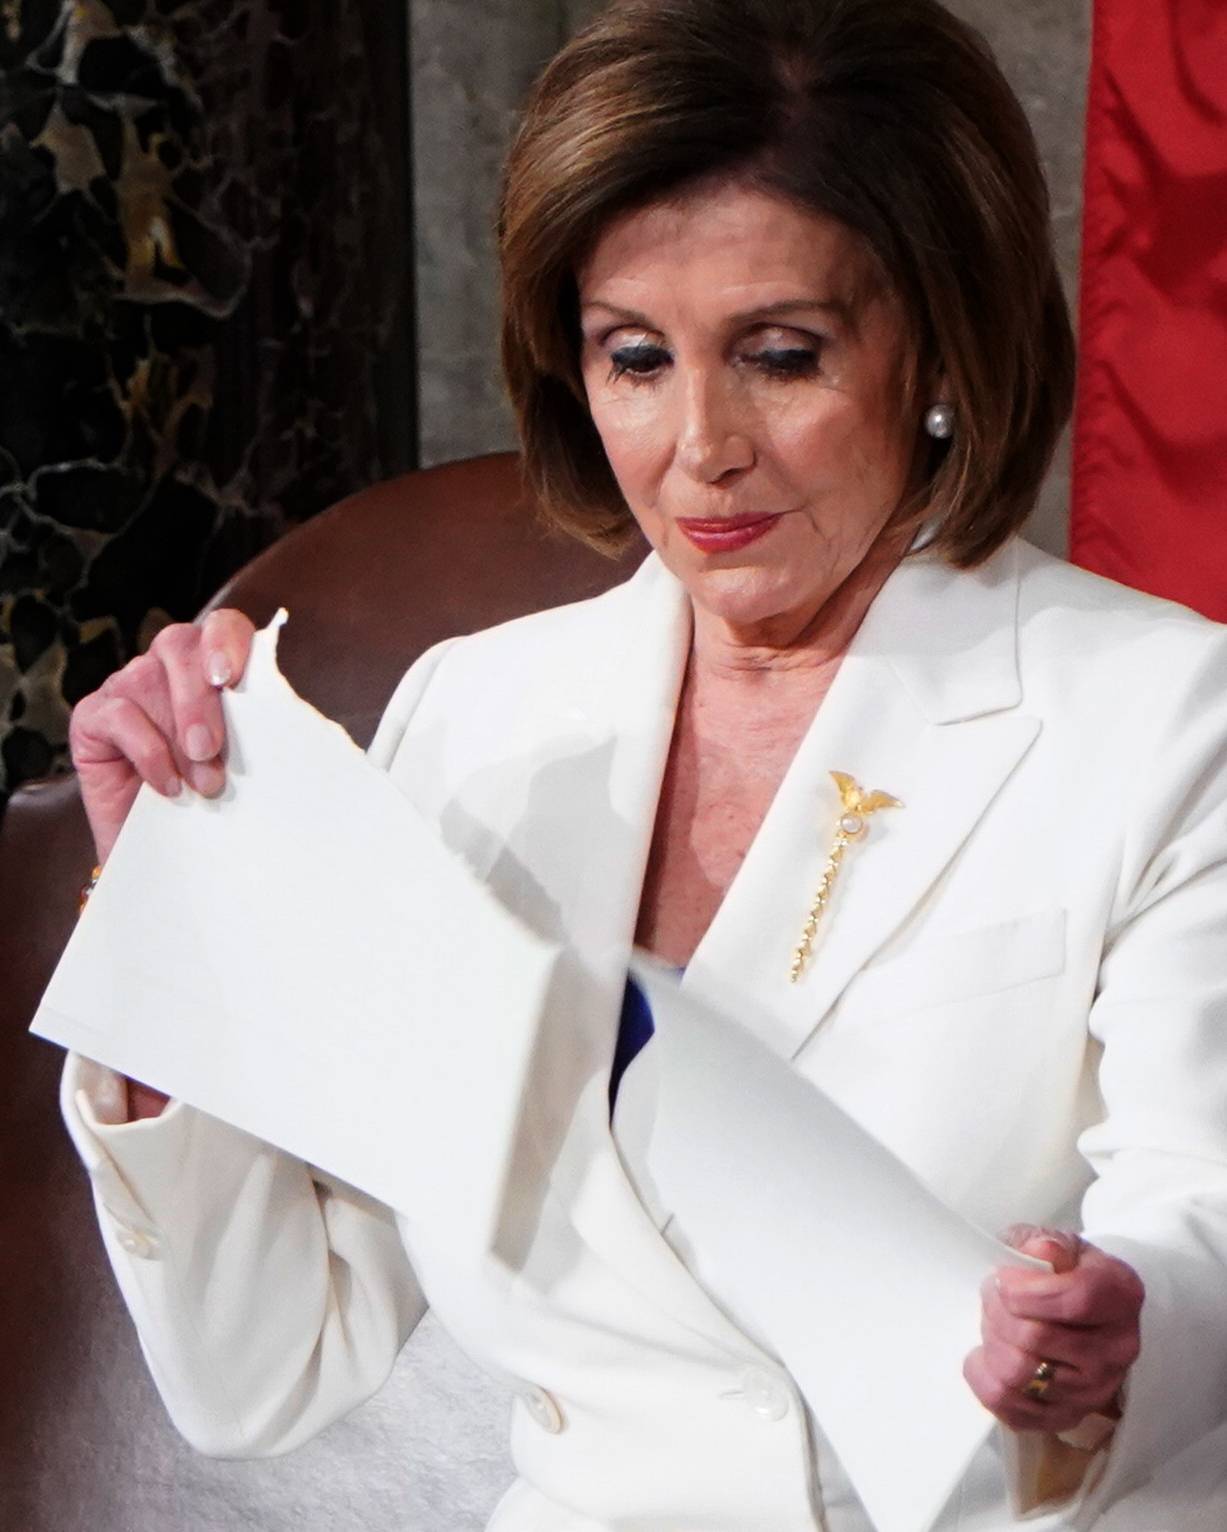 Speaker of the House Pelosi (D-CA) rips up U.S. President Trump's speech following his State of the Union address at the U.S. Capitol in Washington